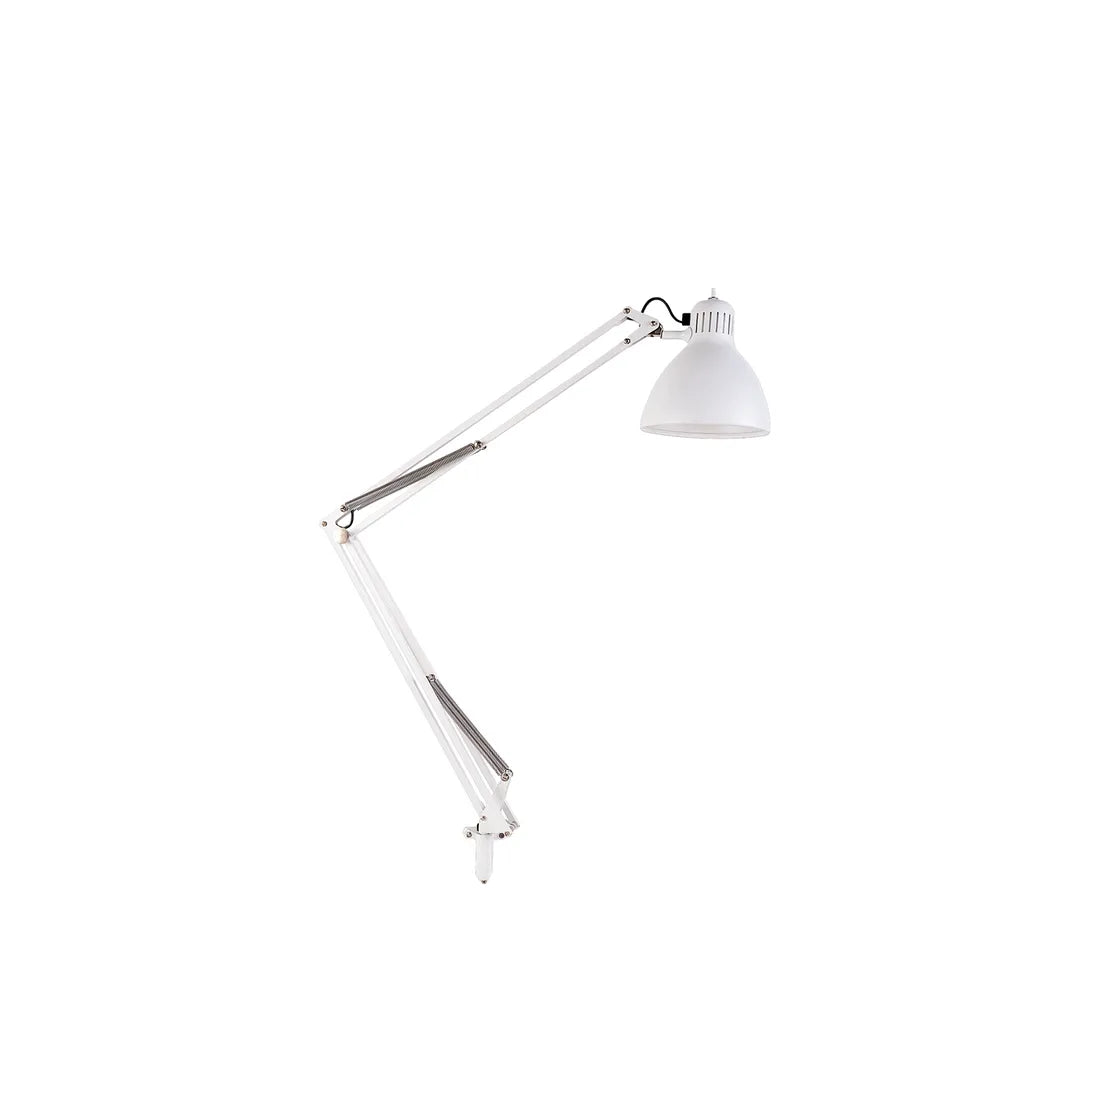 Wall Study lamp Desk, adjustable Wall mounted lamps, wall light fittings for task light office